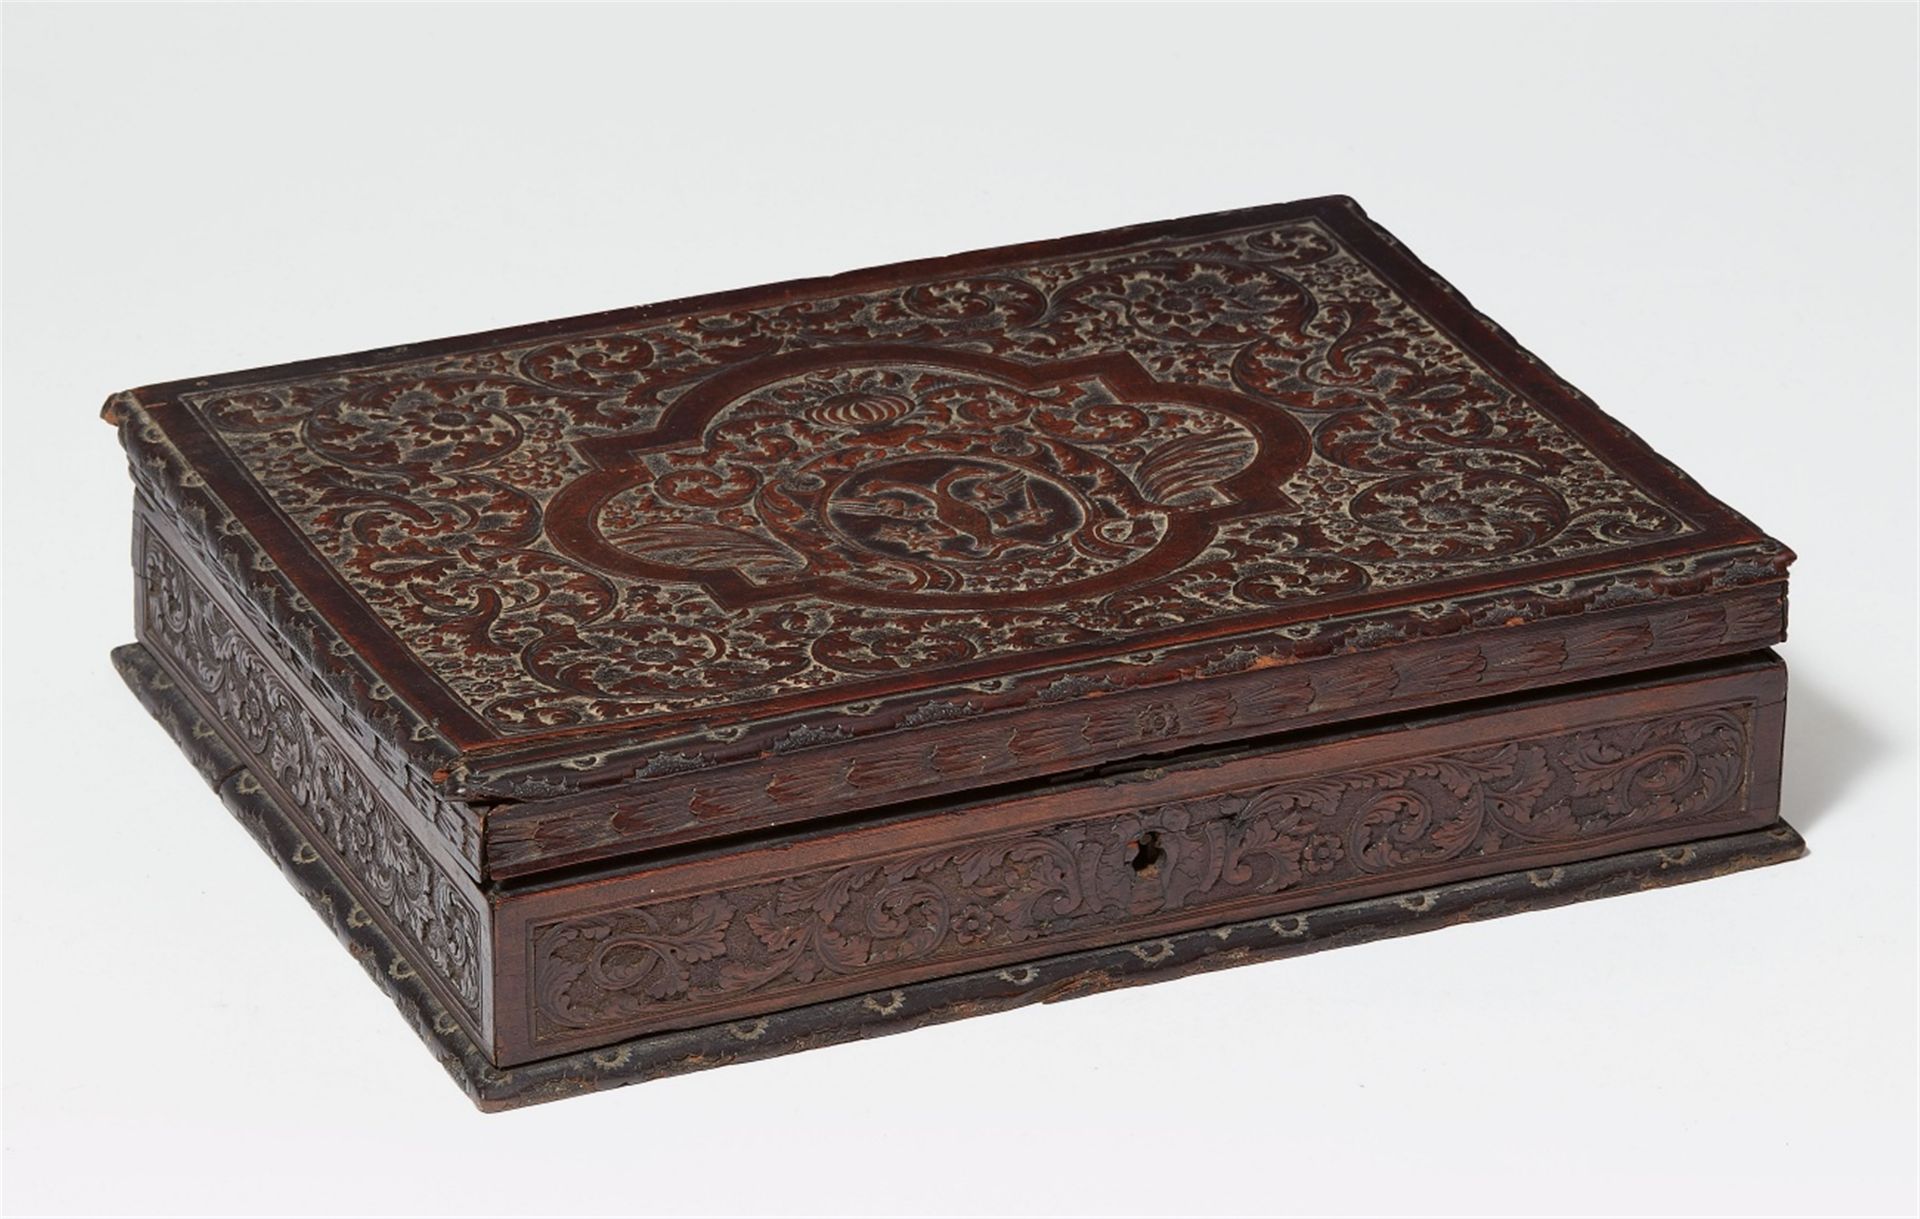 A cherry wood box with the Habsburg coat-of-arms